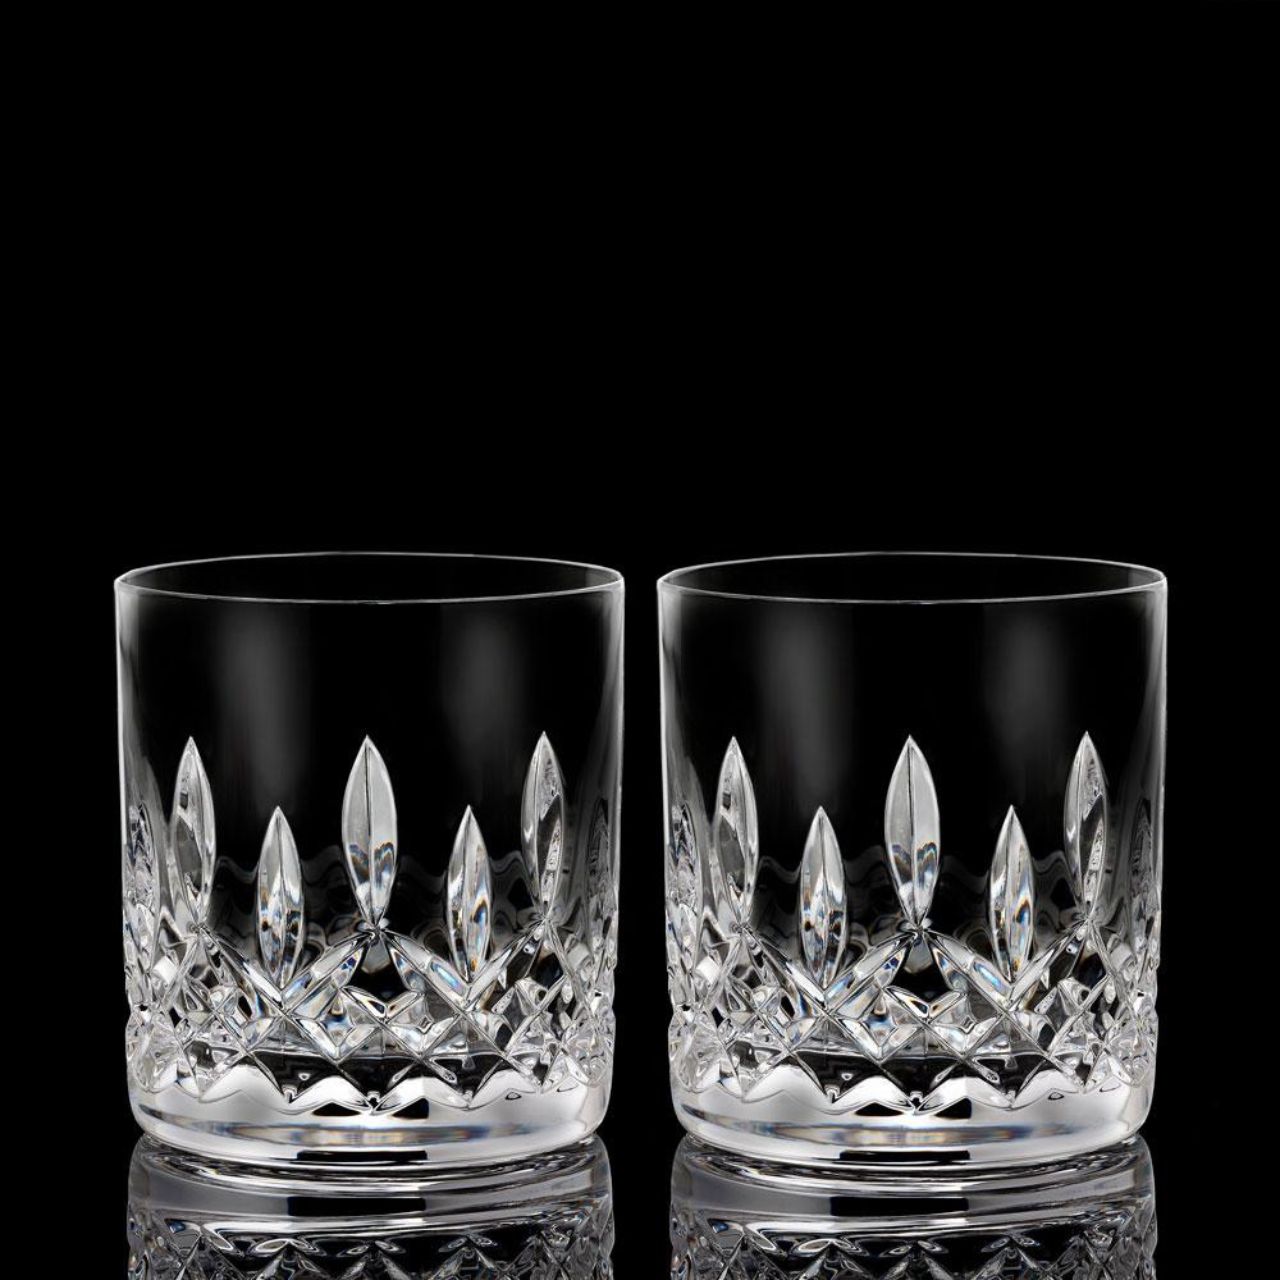 Waterford Crystal Lismore Connoisseur Straight Sided Tumbler Pair  The Waterford Lismore Connoisseur Whiskey Series respects and reveres whiskeys of all varieties with a flight of hand crafted crystal tasting glasses, each one individually shaped and designed for a specific whiskey to be enjoyed straight, neat, or on the rocks.